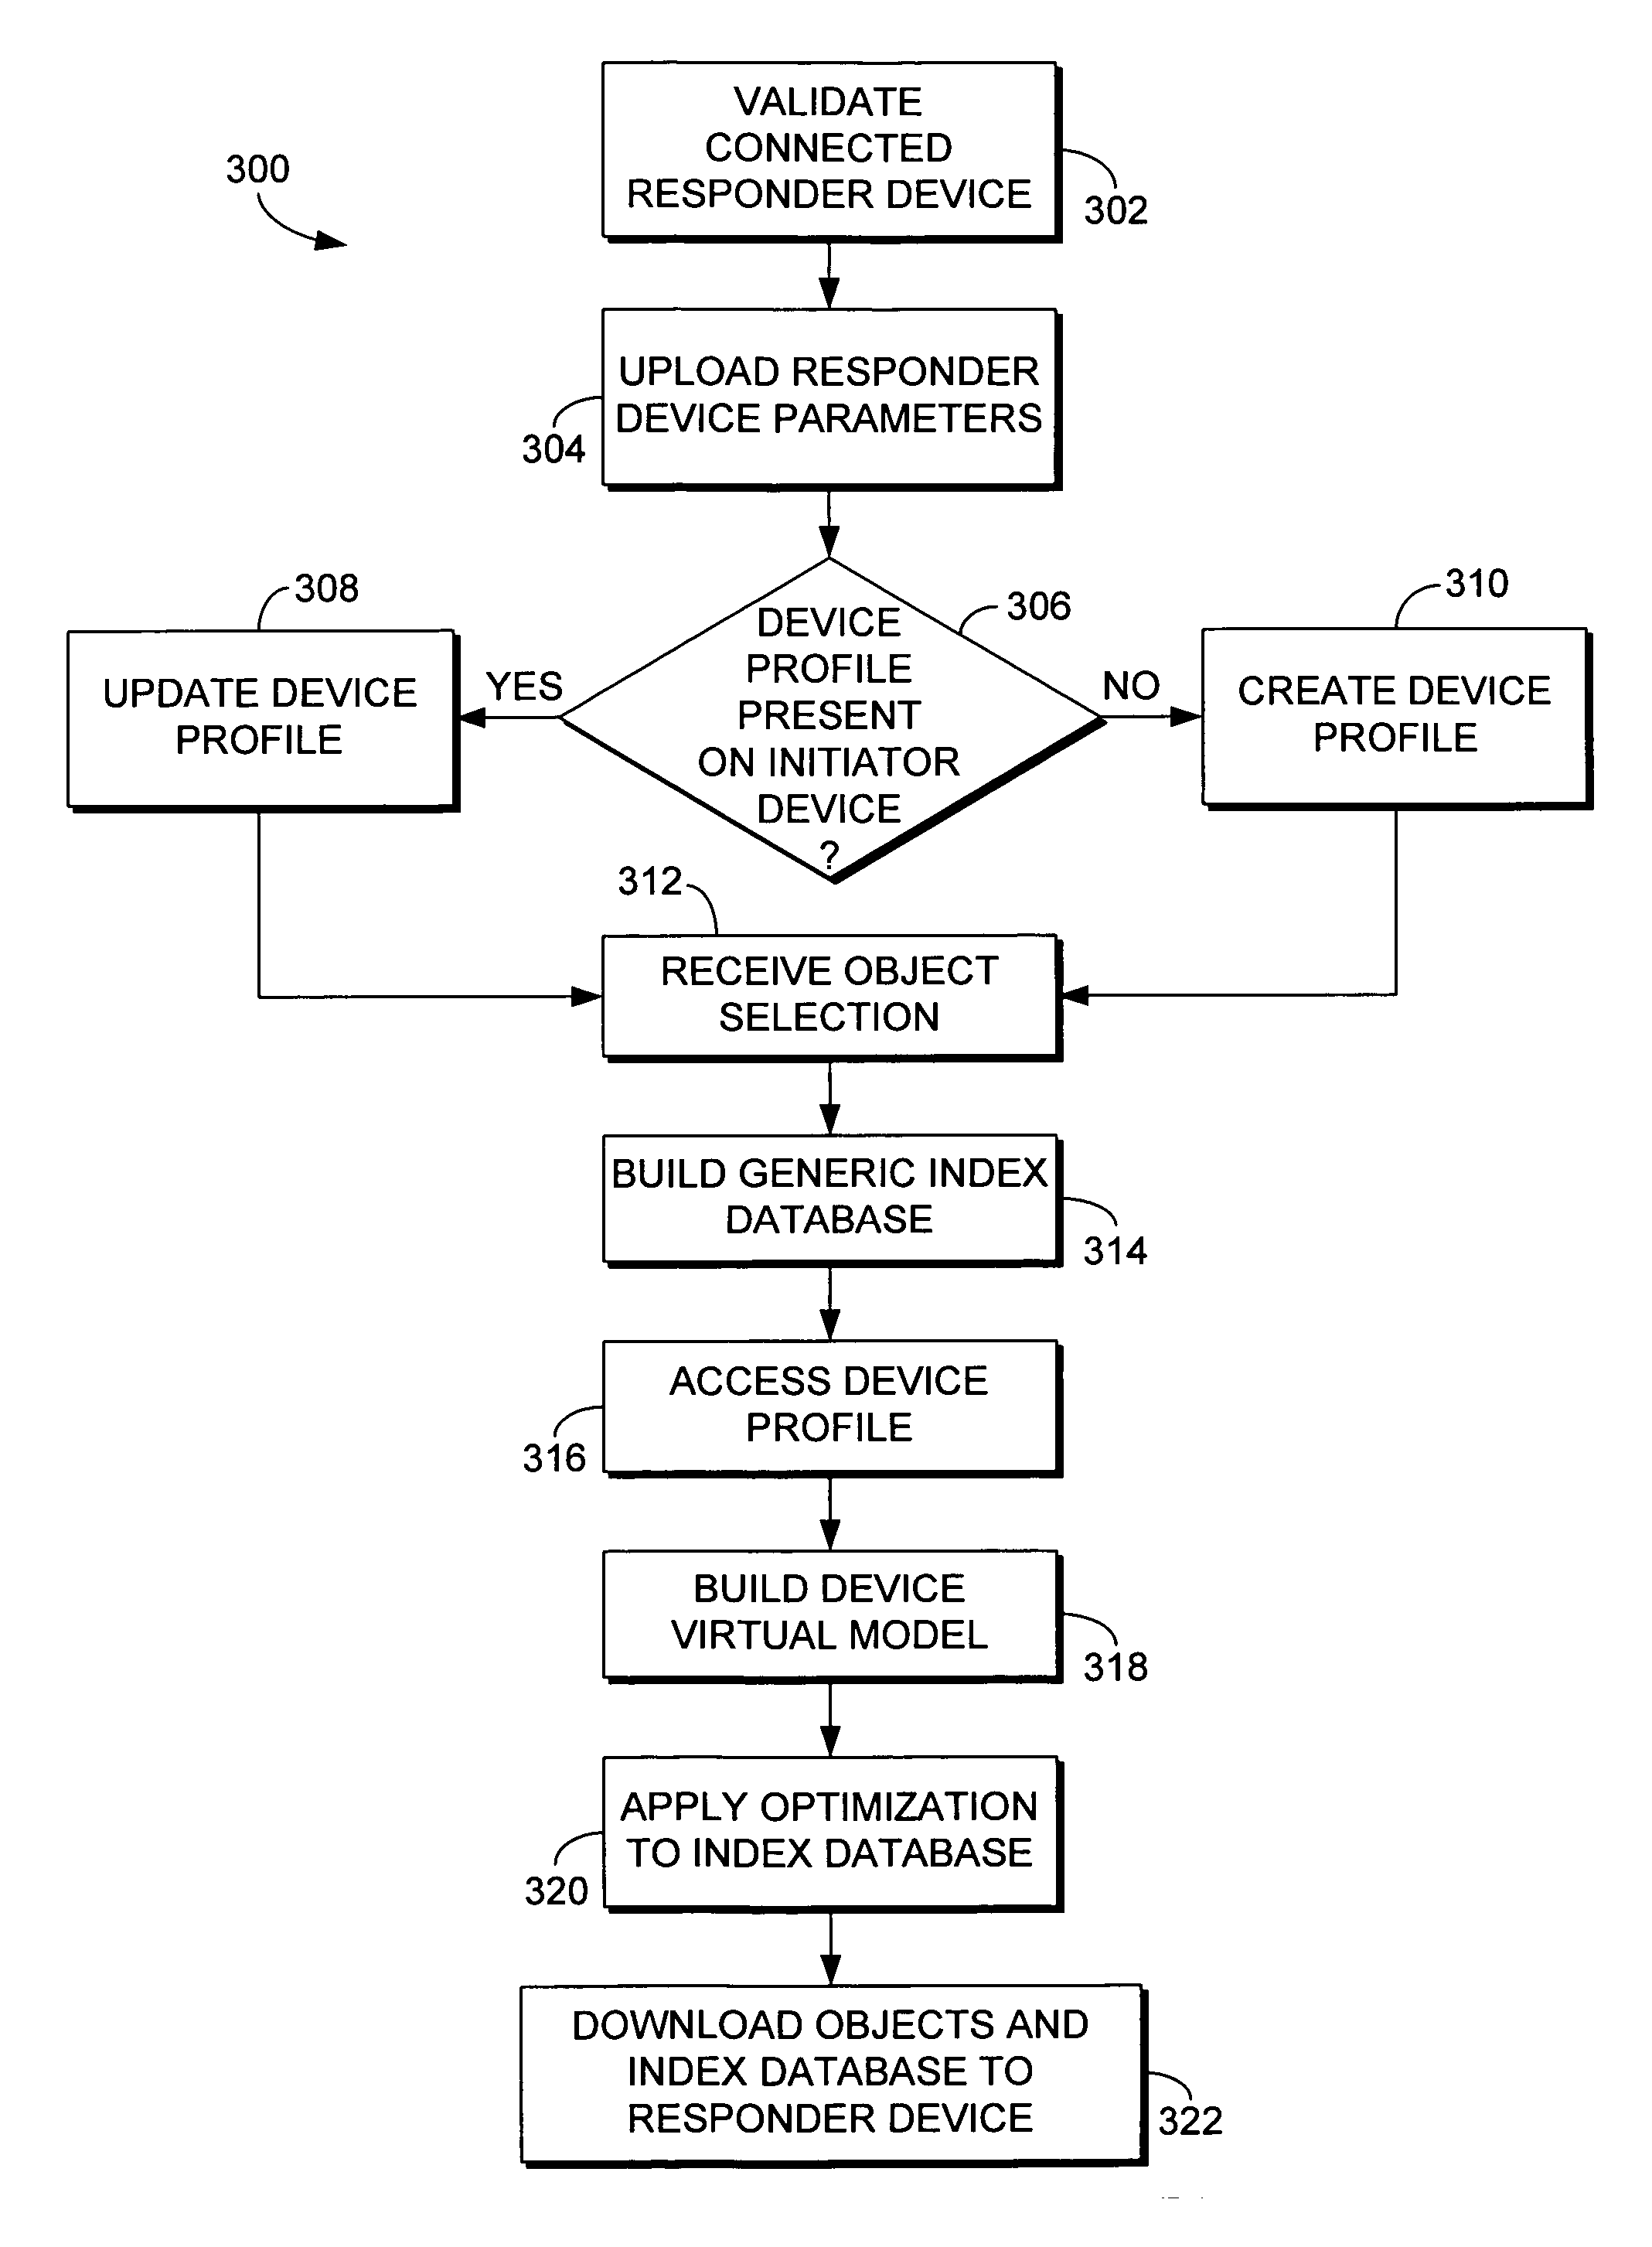 Device specific content indexing for optimized device operation